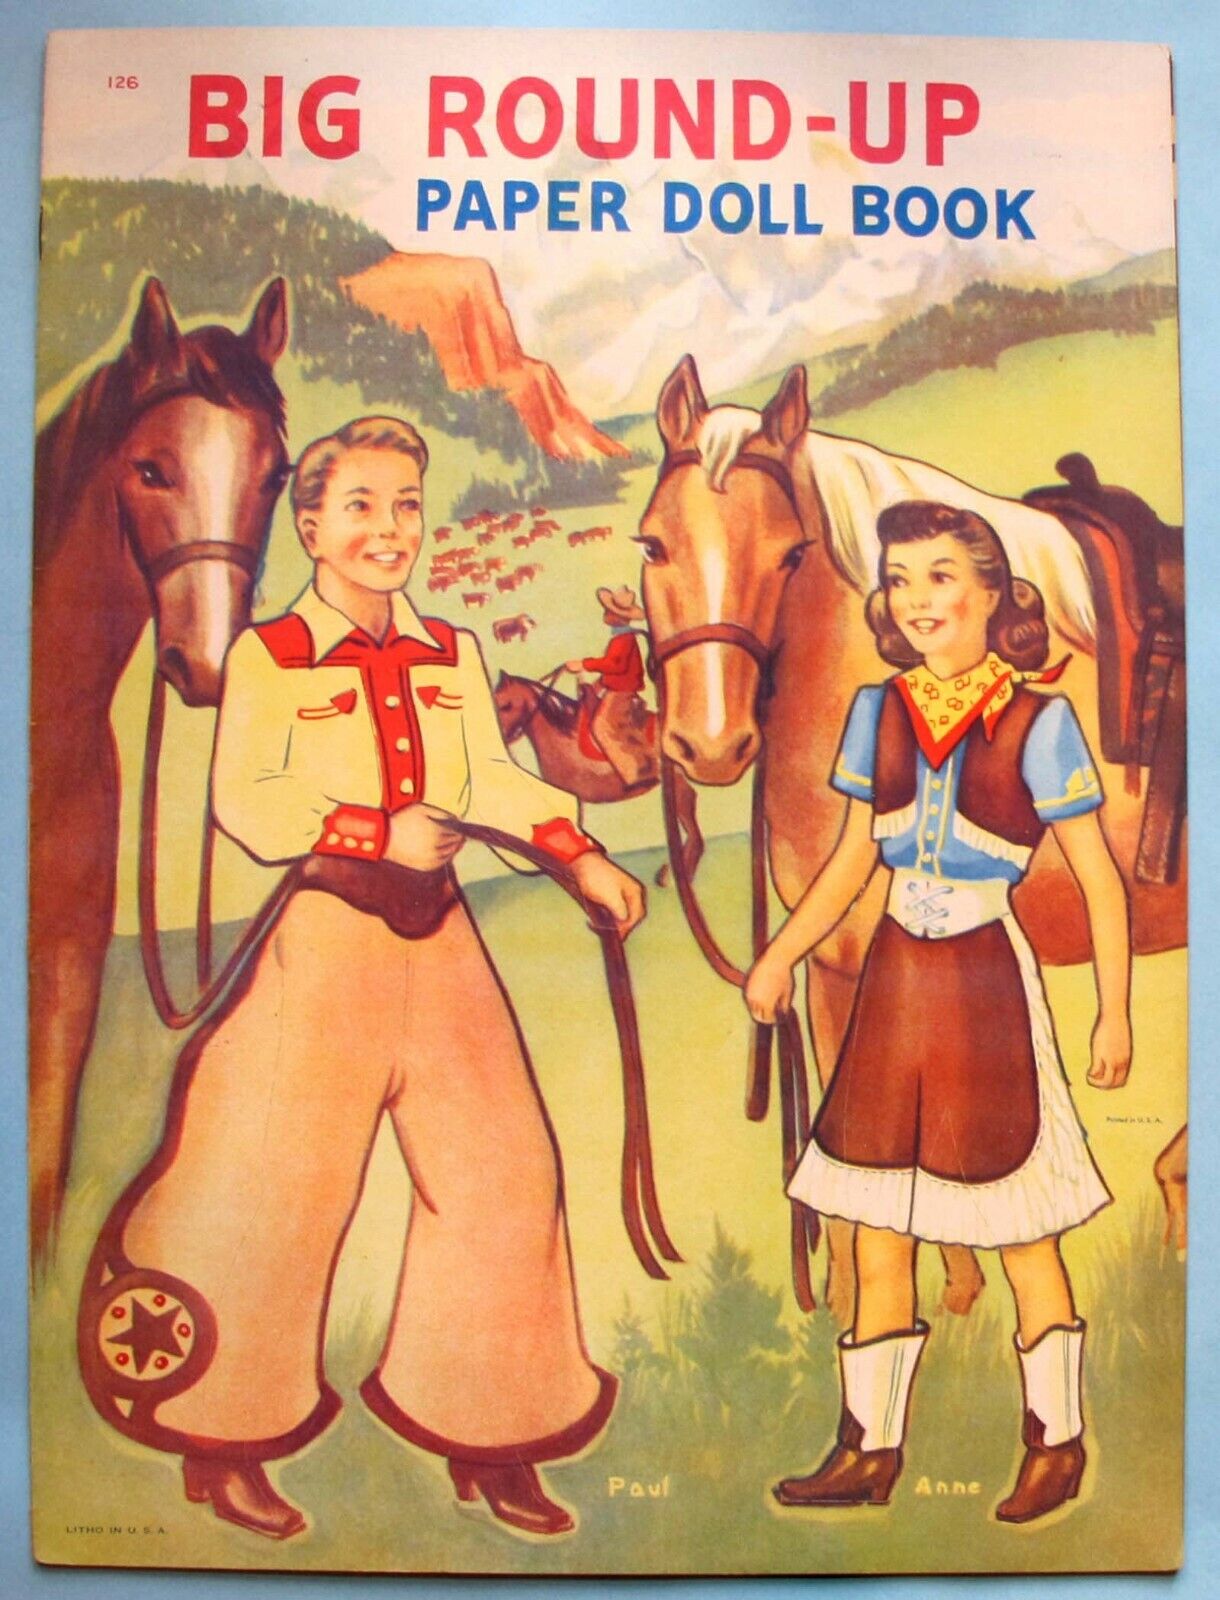 VINTAGE - BIG ROUND-UP PAPER DOLL BOOK - 126 - LOWE - UNPUNCHED - 1940's/1950's 